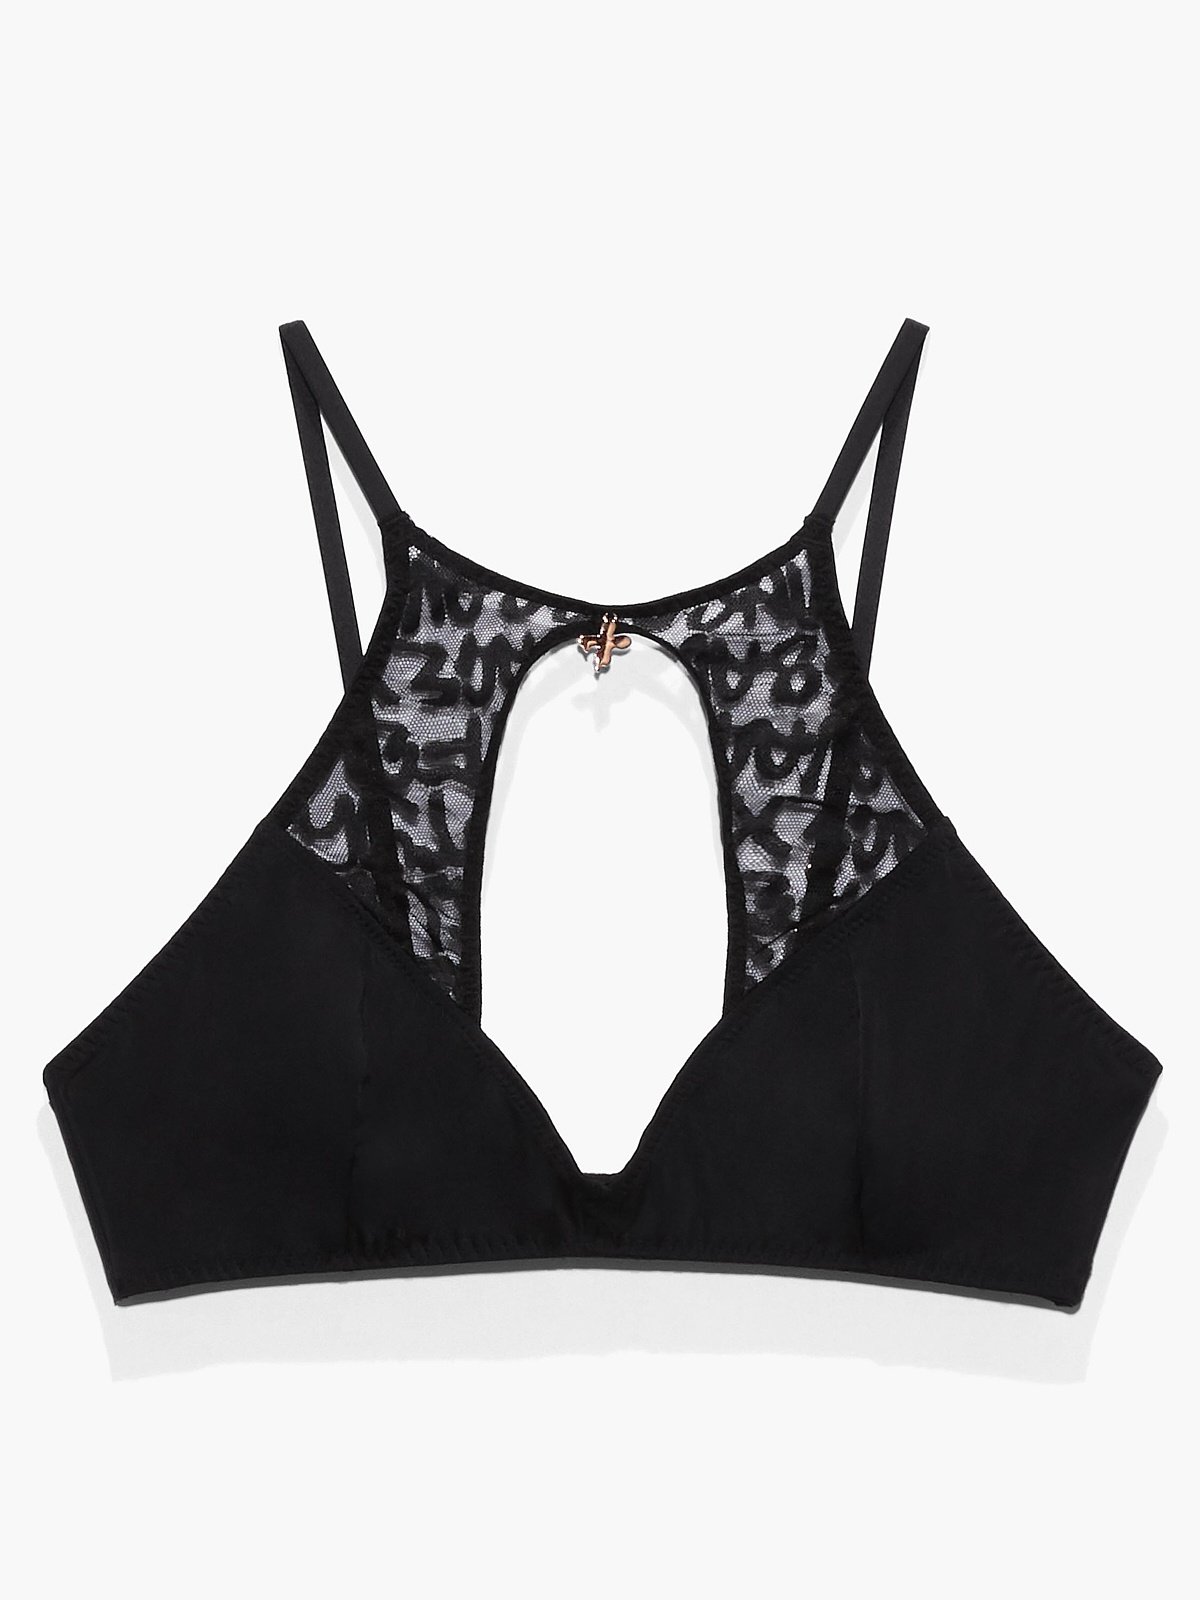 Tagged by Savage High-Neck Bralette in Black